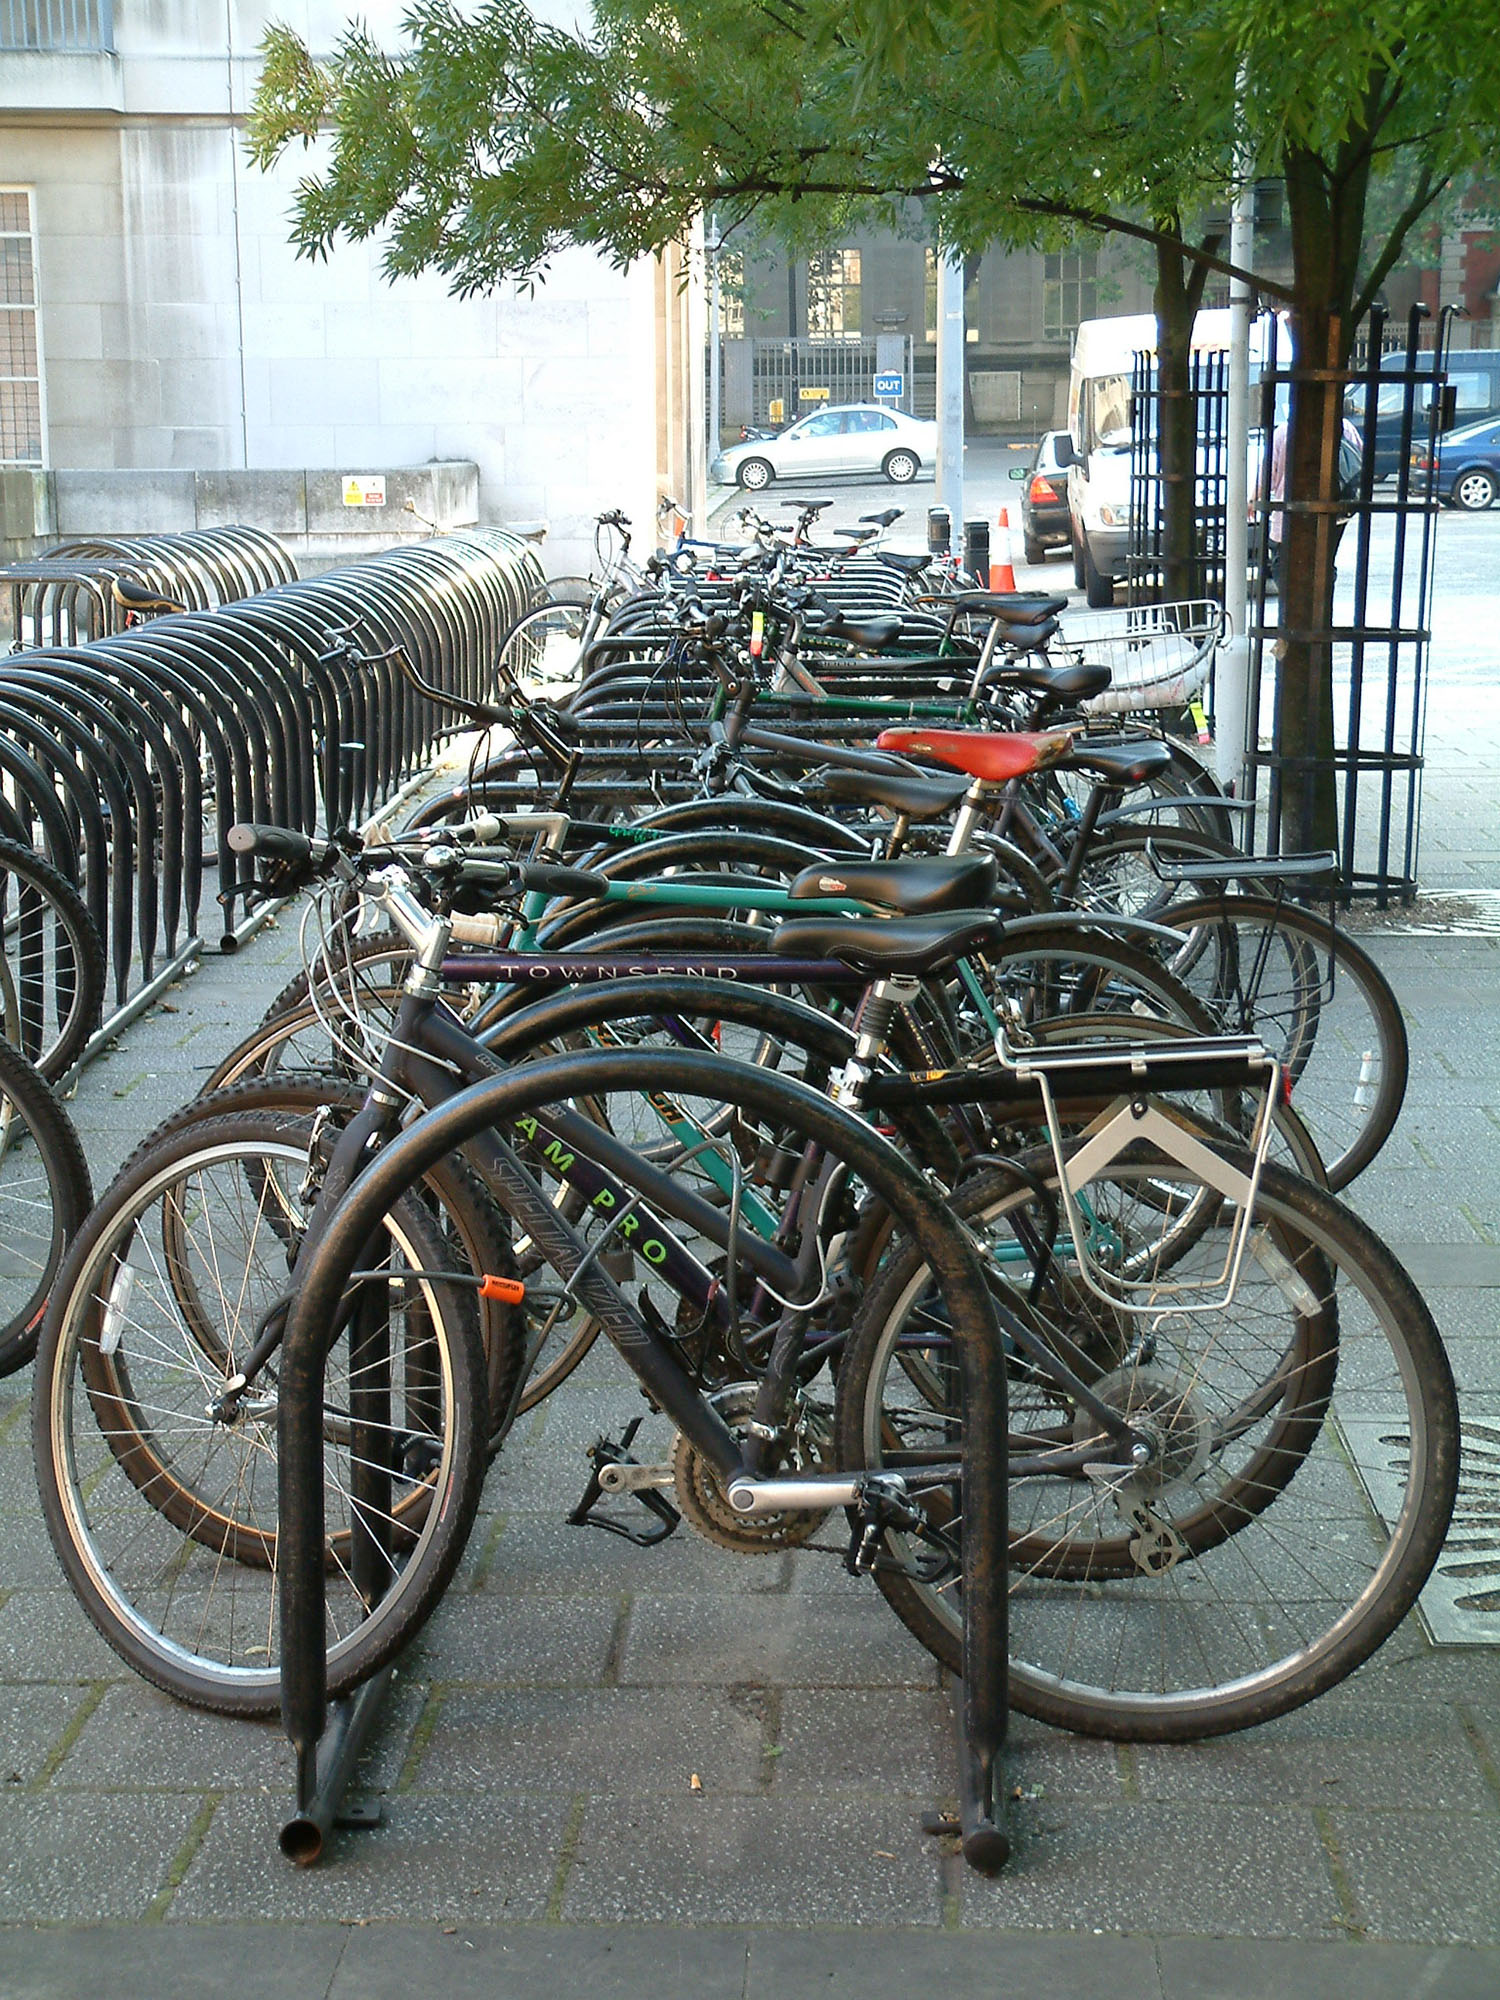 Fig. 31.29 A U-shaped bike rack is a low-cost and relatively secure option.